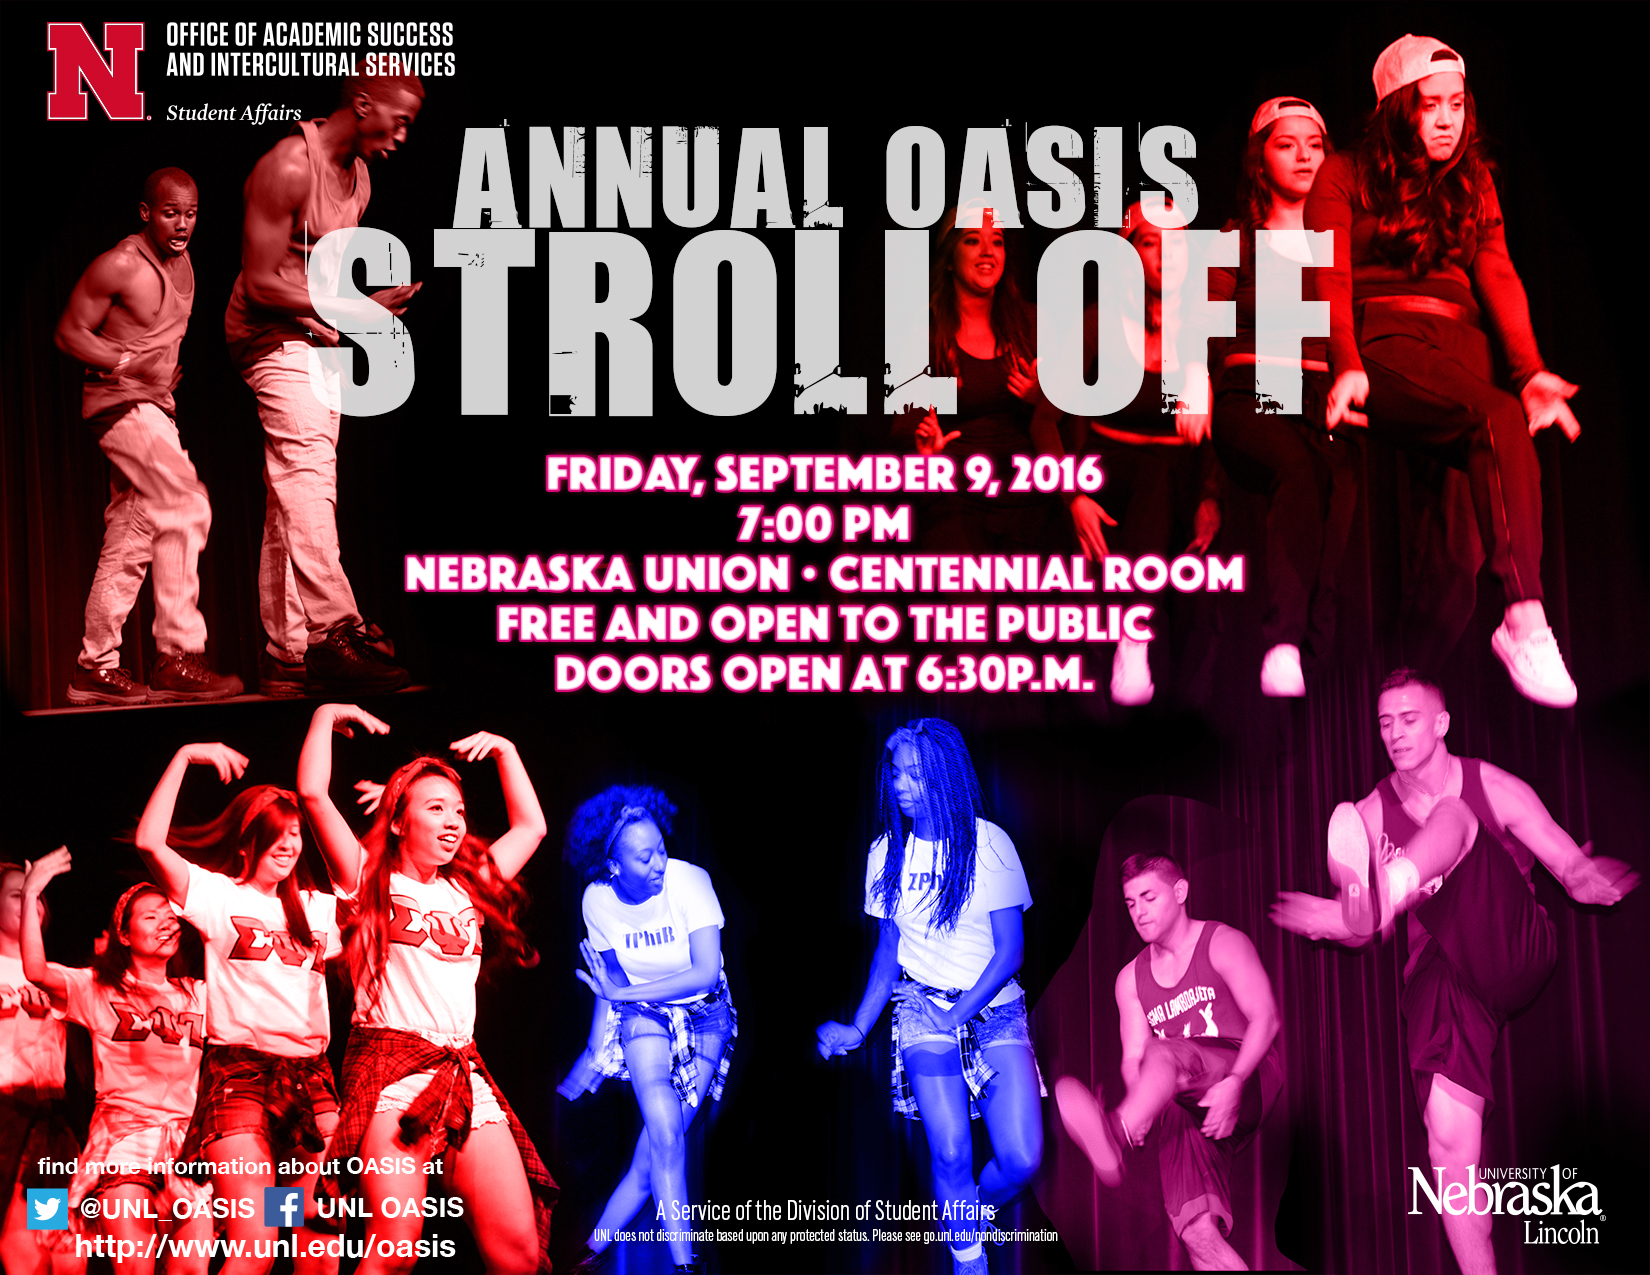 OASIS Stroll Off Poster